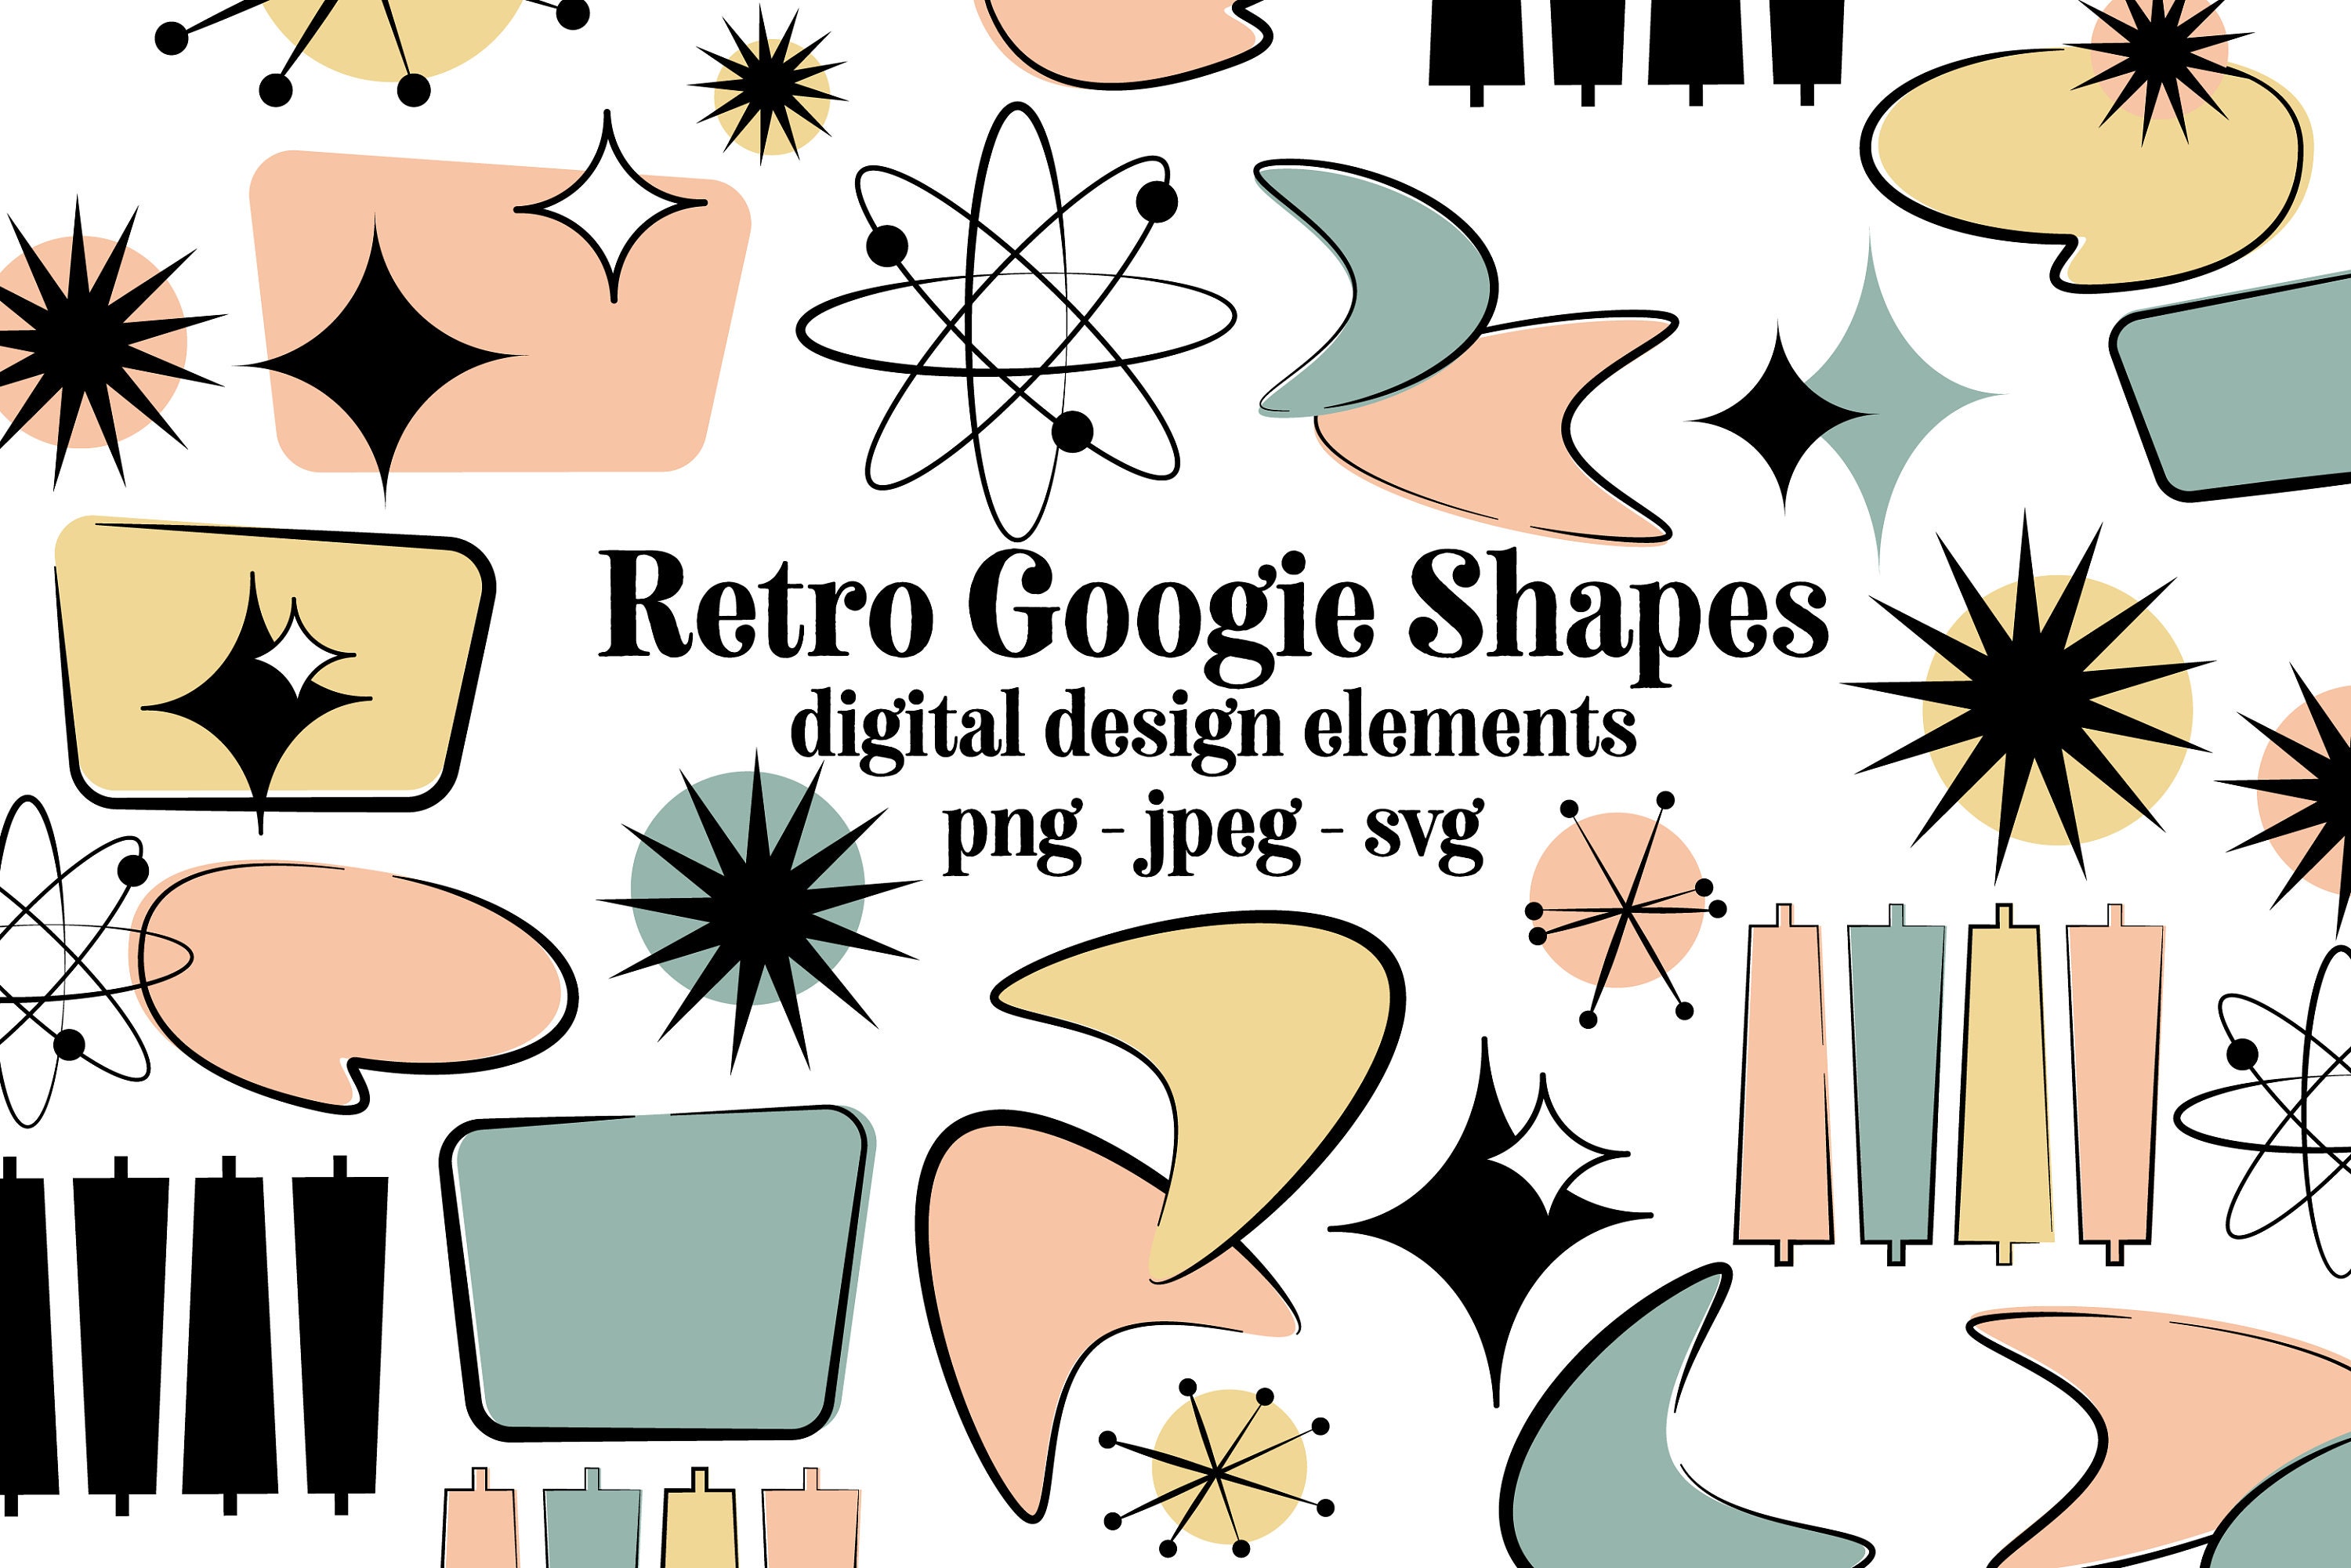 Retro Googie Shapes Design Elements Mid Century Modern Icons Clipart Googie  Sign Shapes 1950s 1940s Digital Clip Art 50s - Etsy